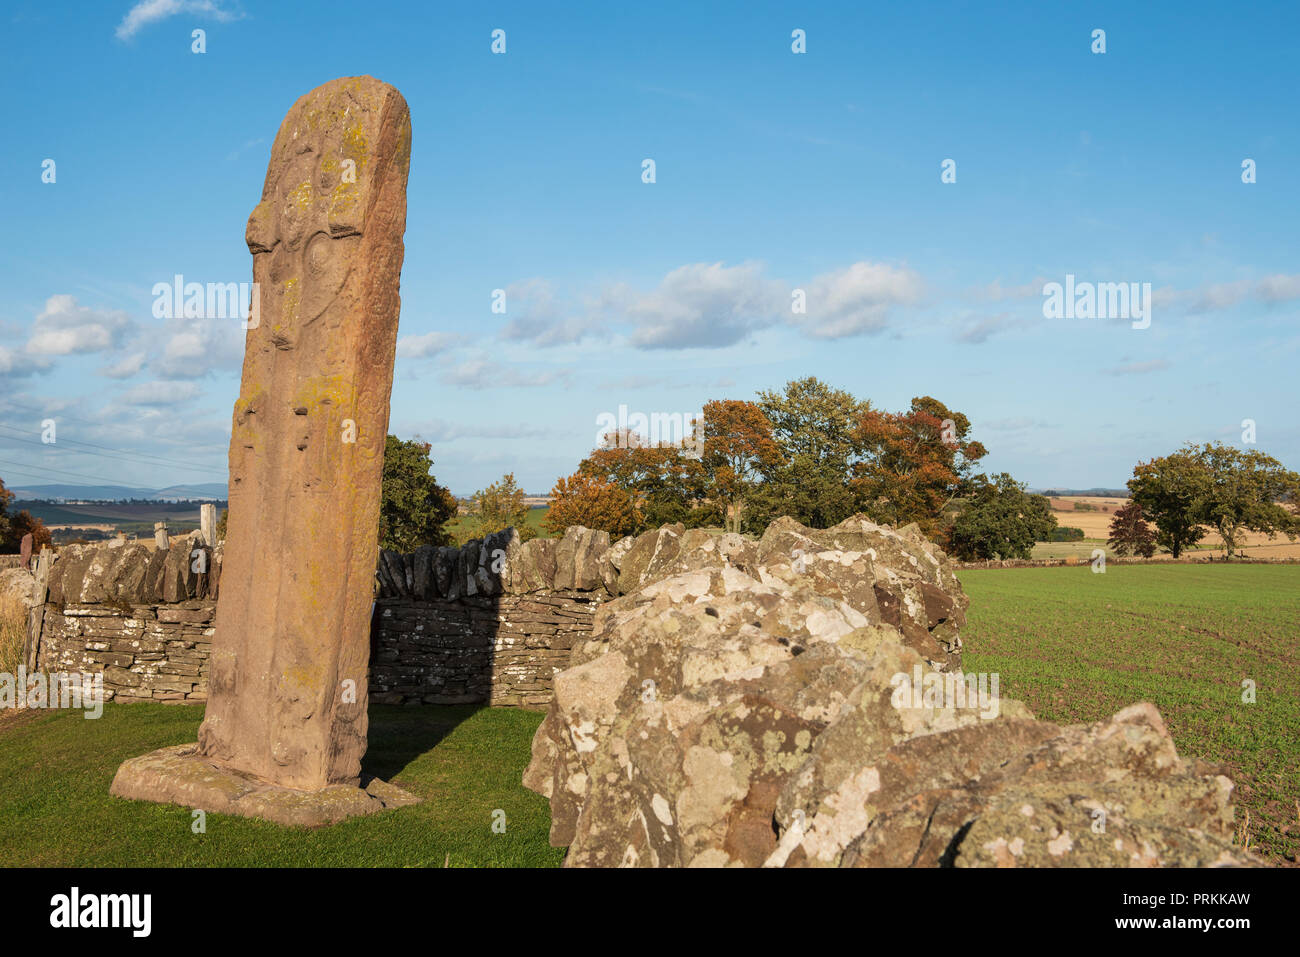 The Great Stone ( The Roadside Cross ) one of three 8th century Pictish stones at the side of the B9134 at Aberlemno, Angus, Angus, Scotland. Stock Photo